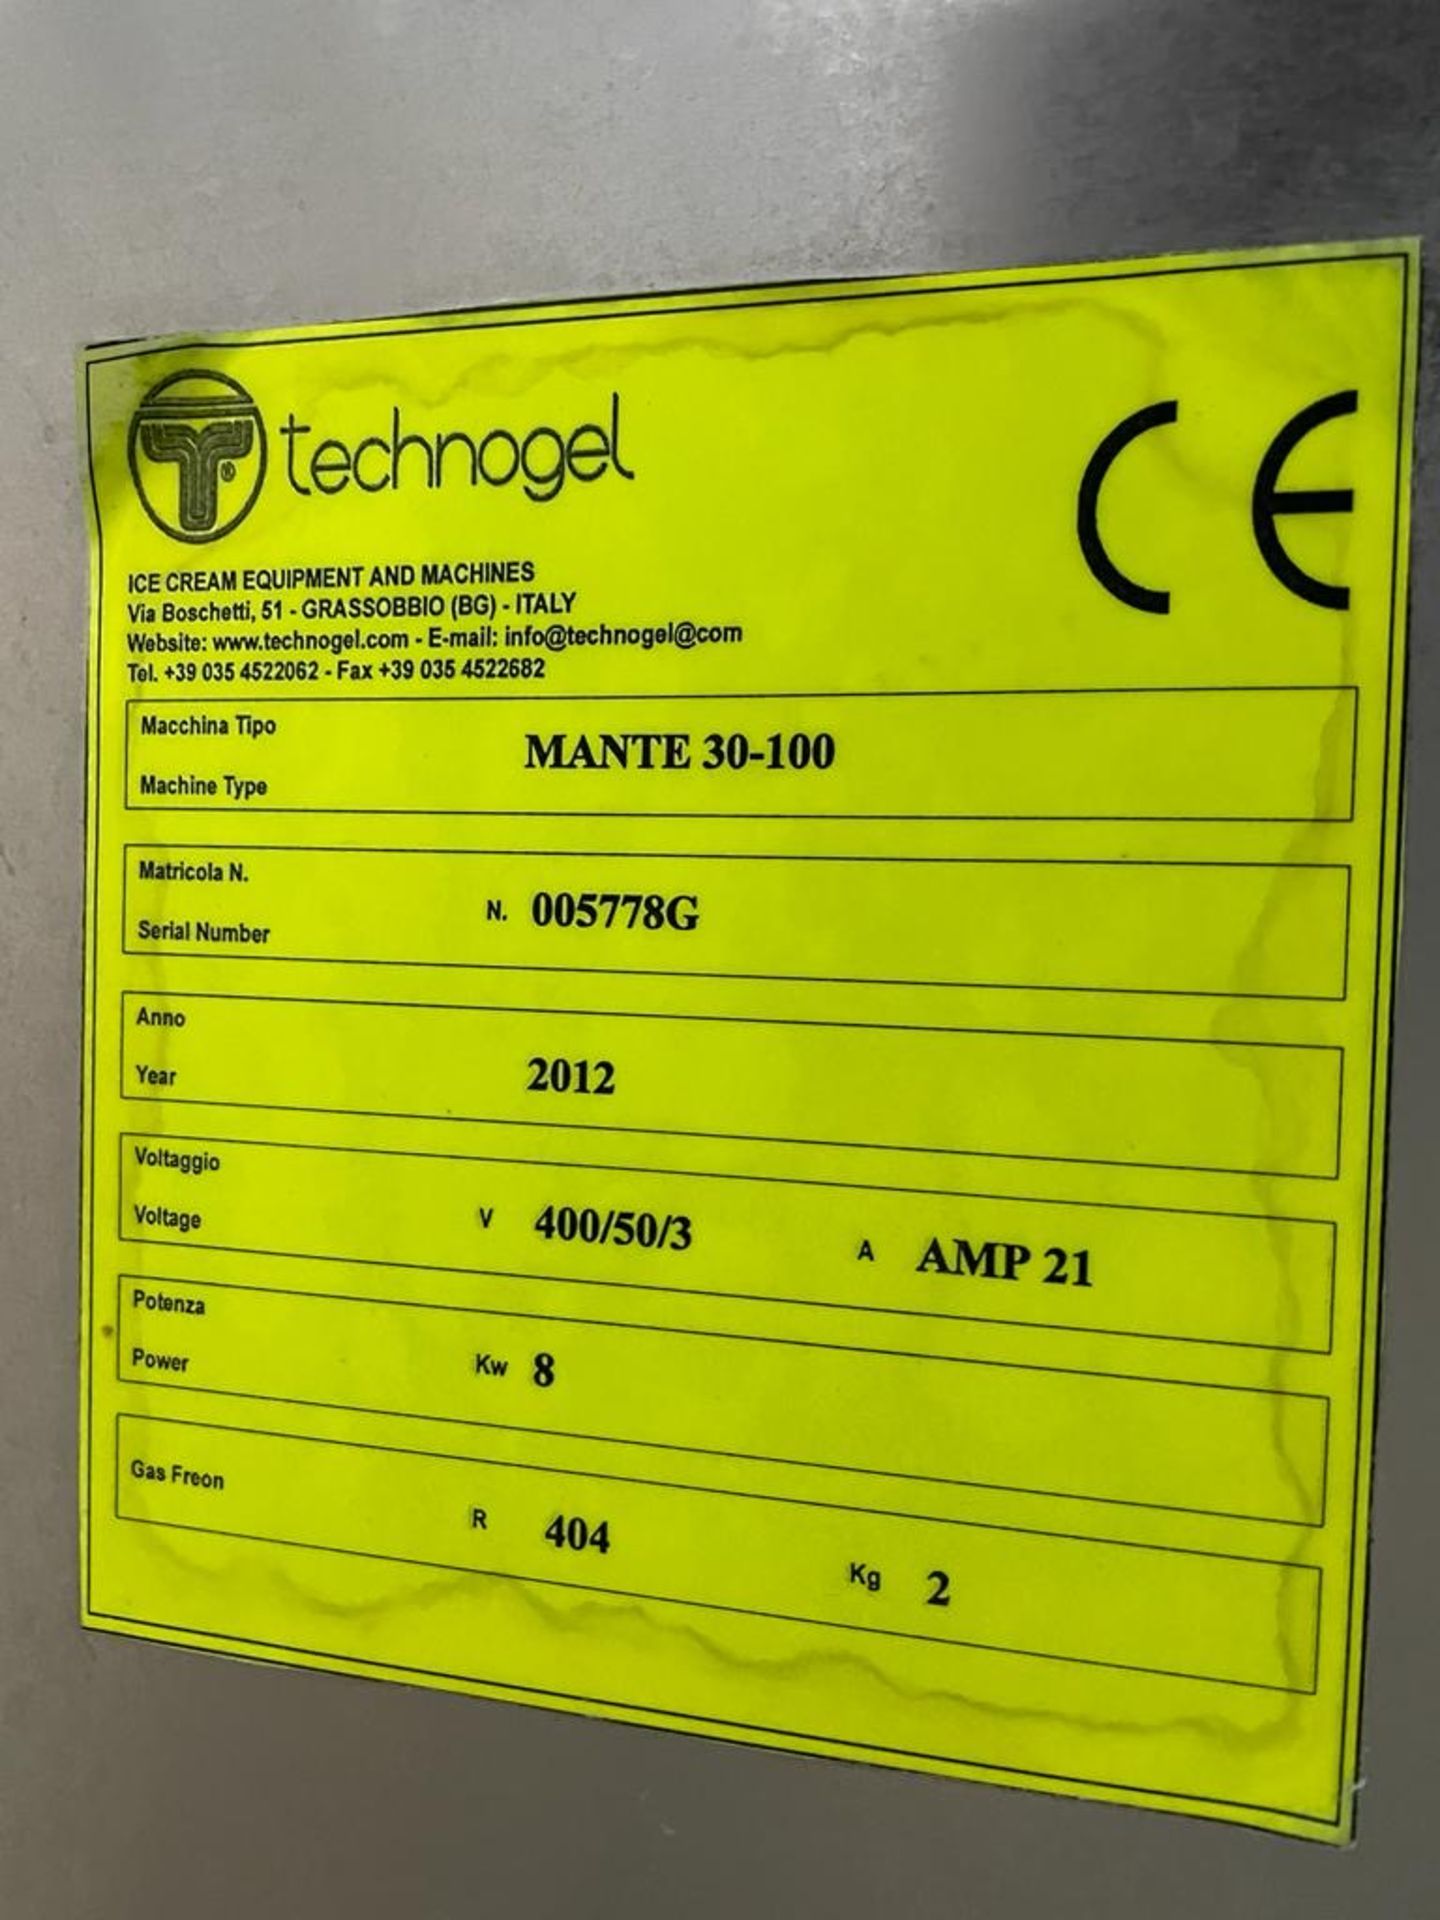 Technogel Mante 30-100 Batch Freezer, Serial Number 0057789, 2012 (Location: NW London. Please Refer - Image 2 of 2